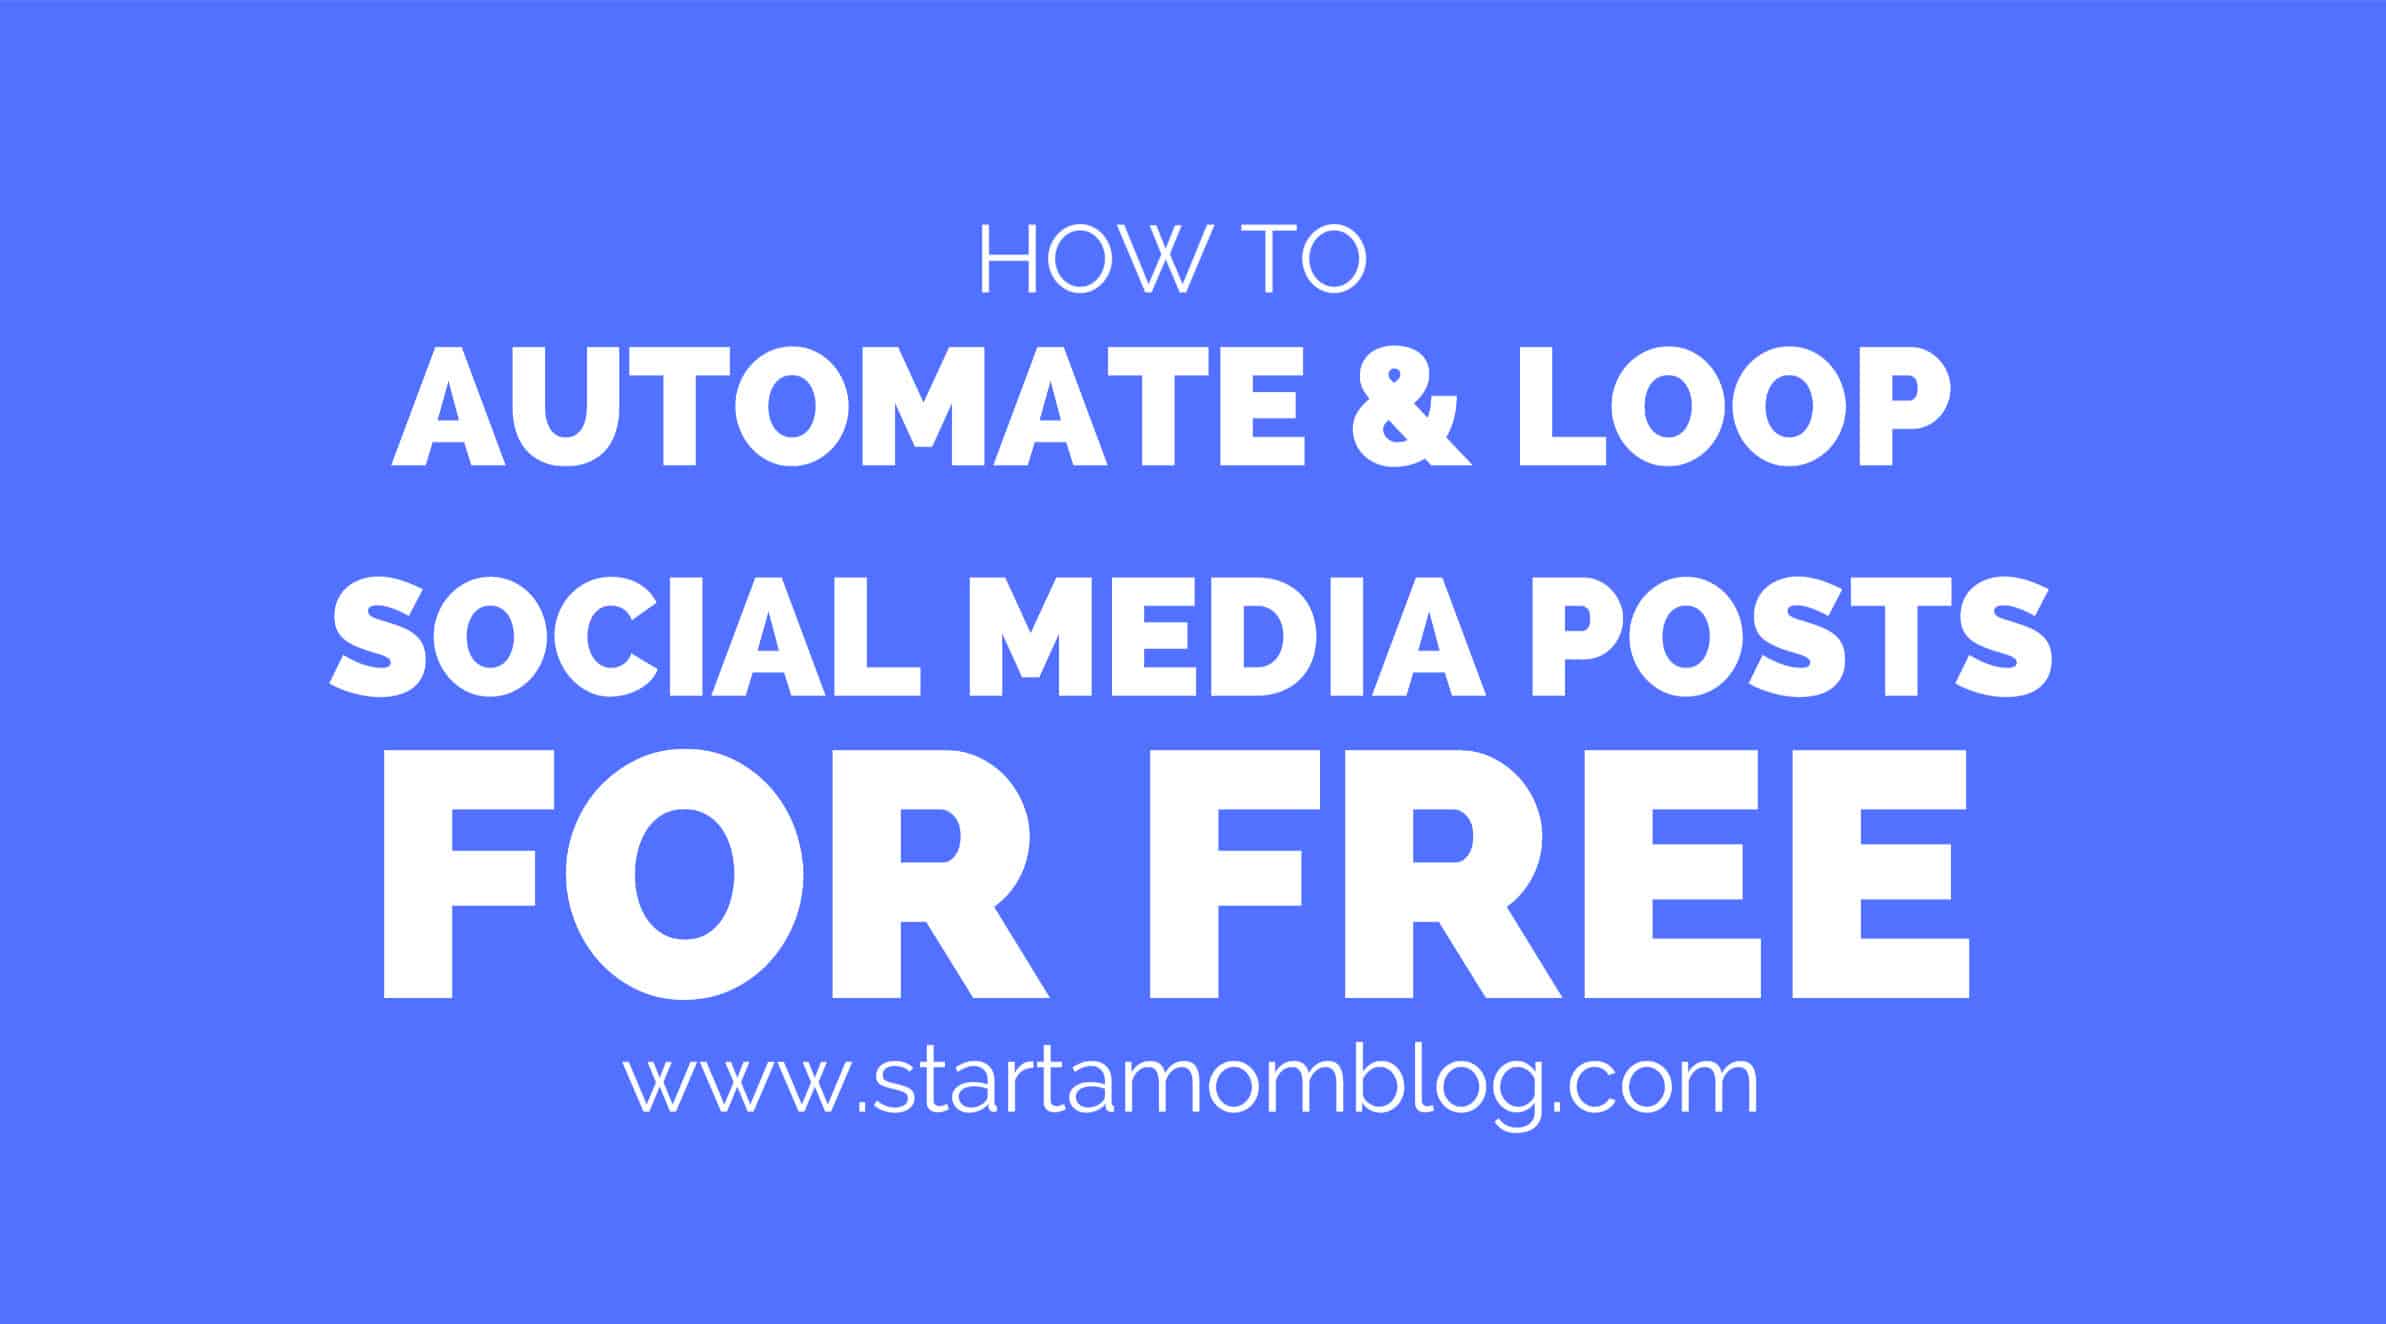 How to Automate and Loop Social Media Posts for Free